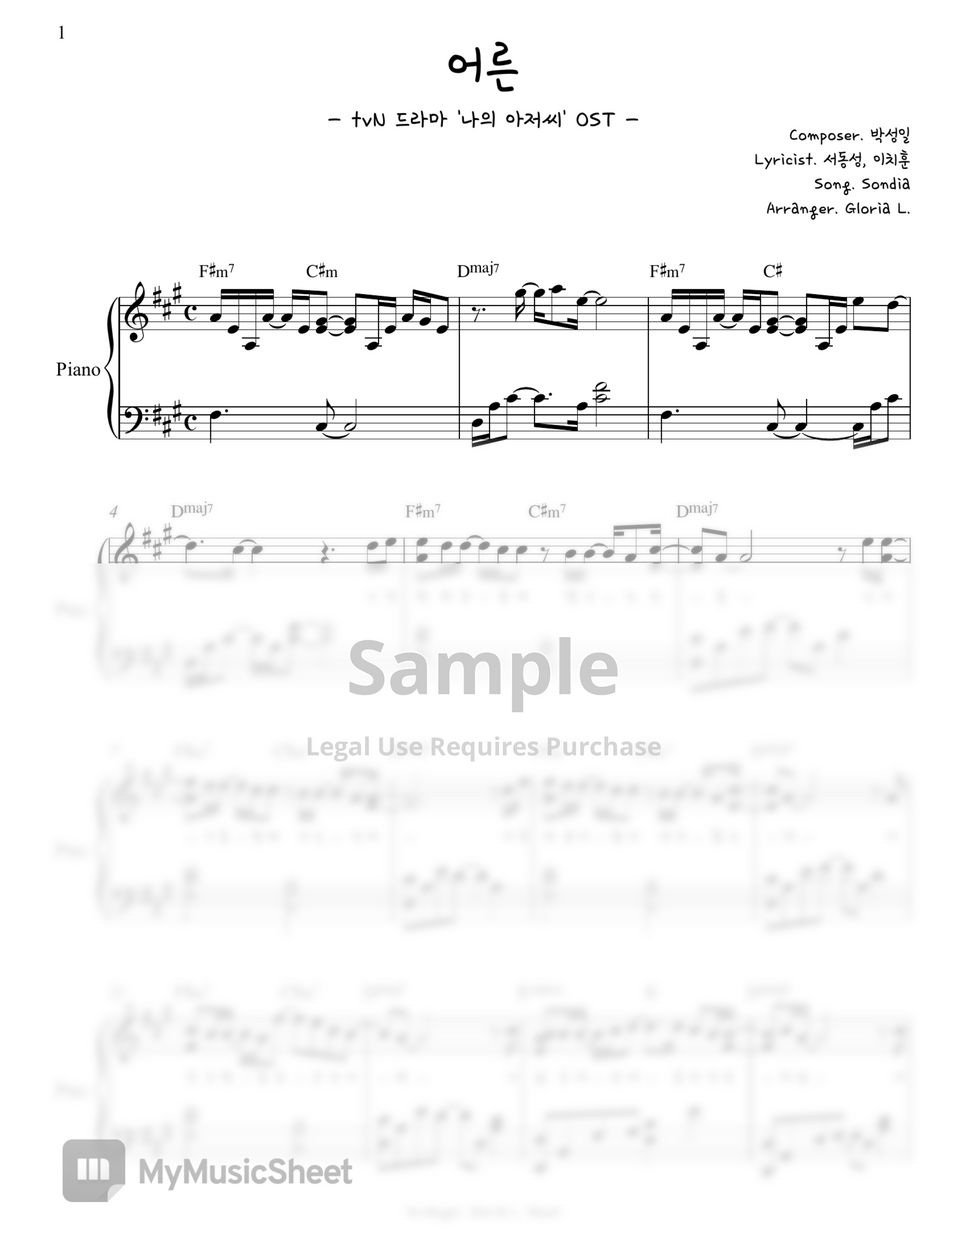 Sondia - Adult (My Mister OST) Piano Sheet by Gloria L.